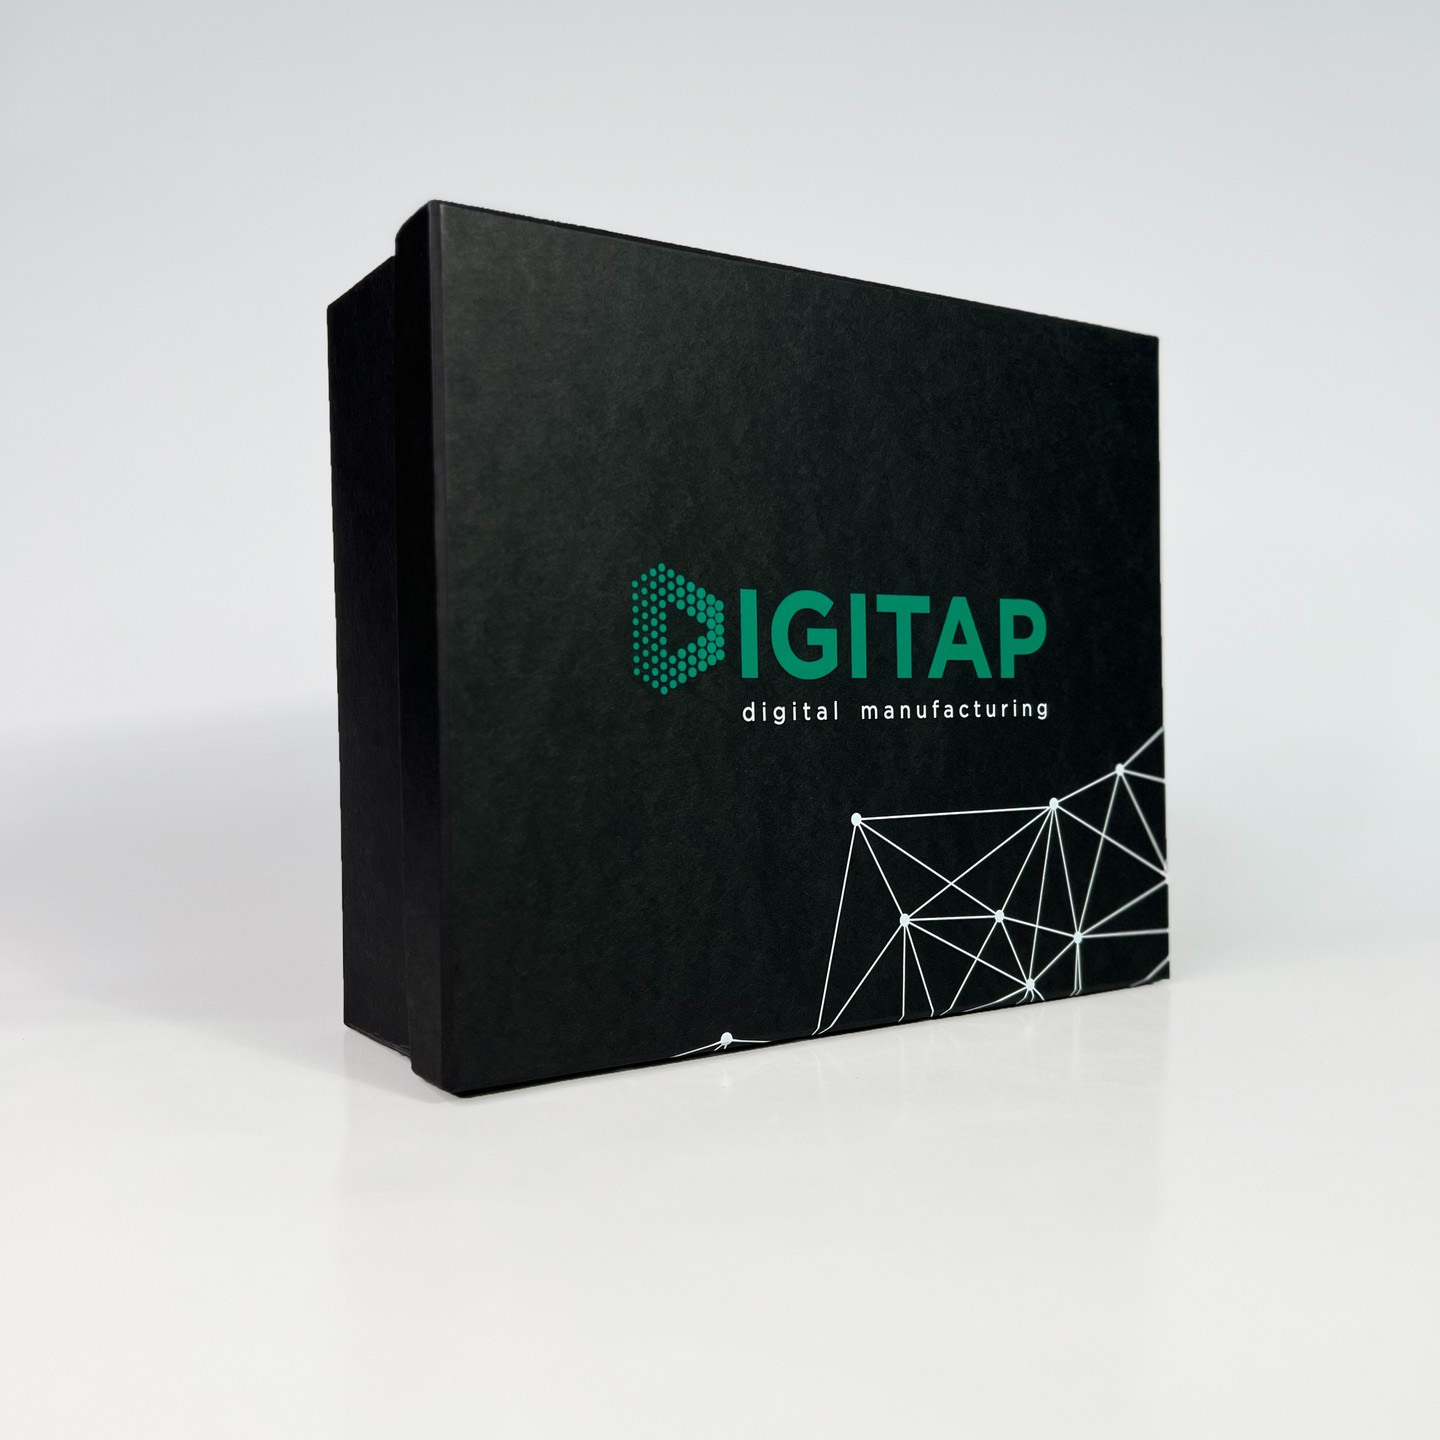 Boxes for the Digitap company 1